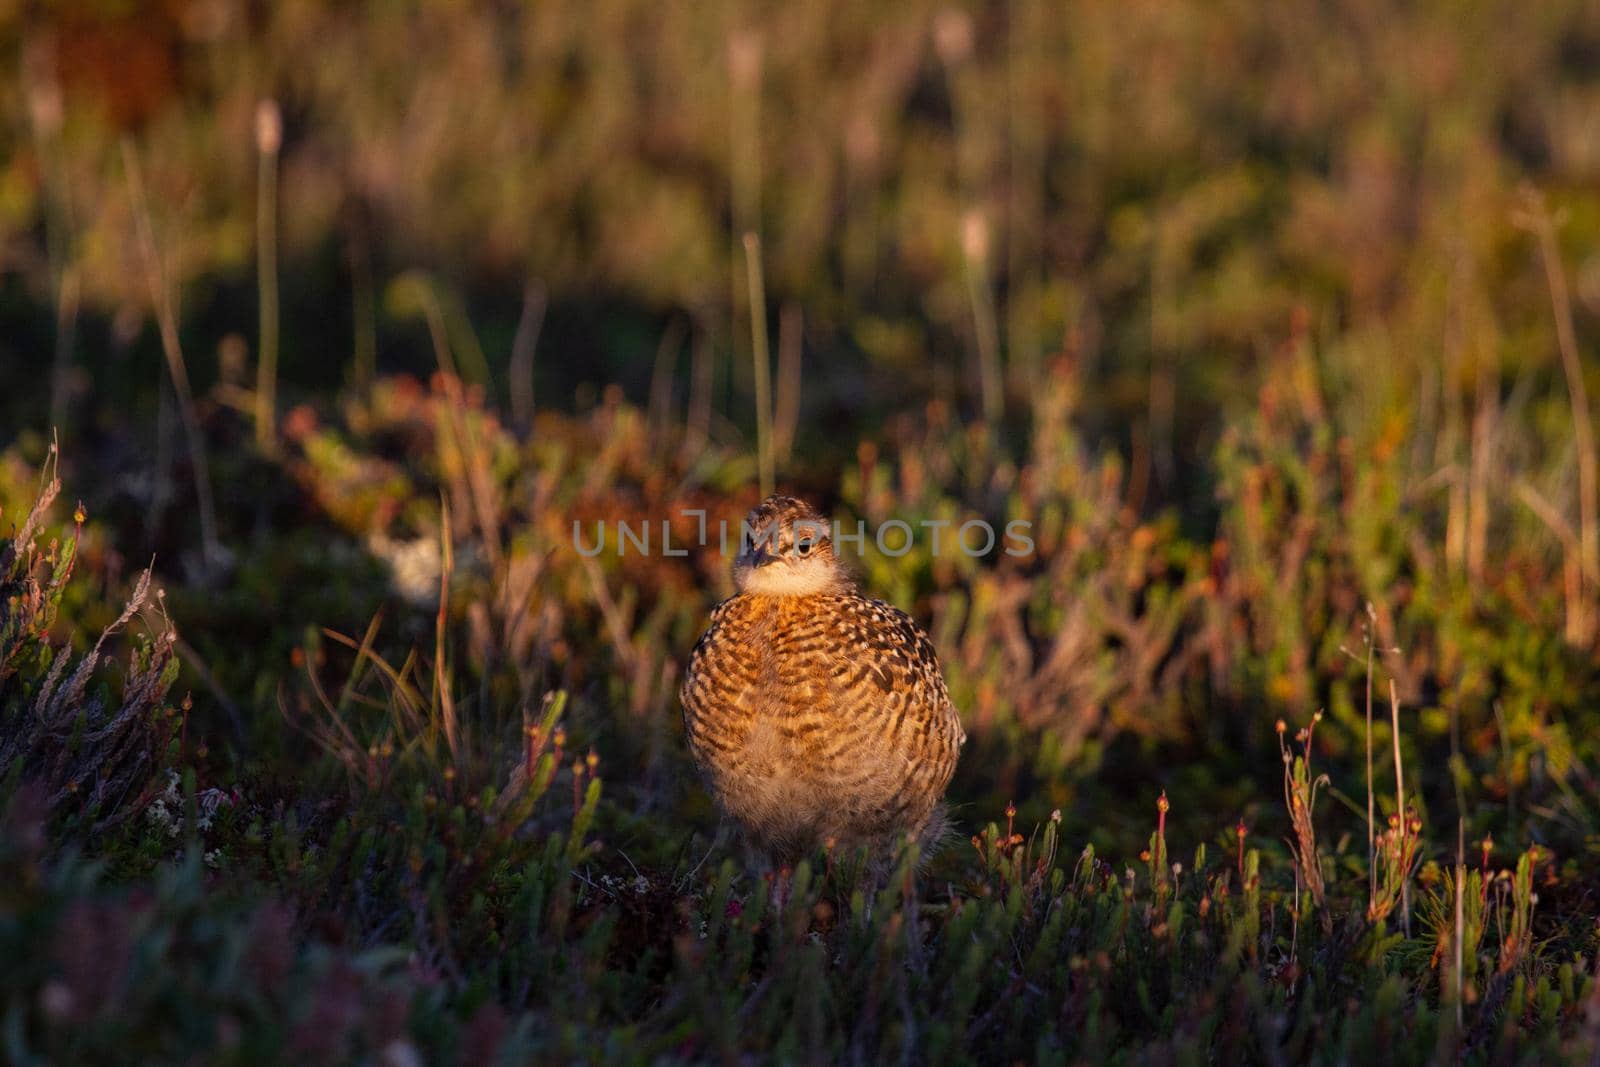 A young willow ptarmigan or grouse hiding among willows in Canada's arctic tundra by Granchinho